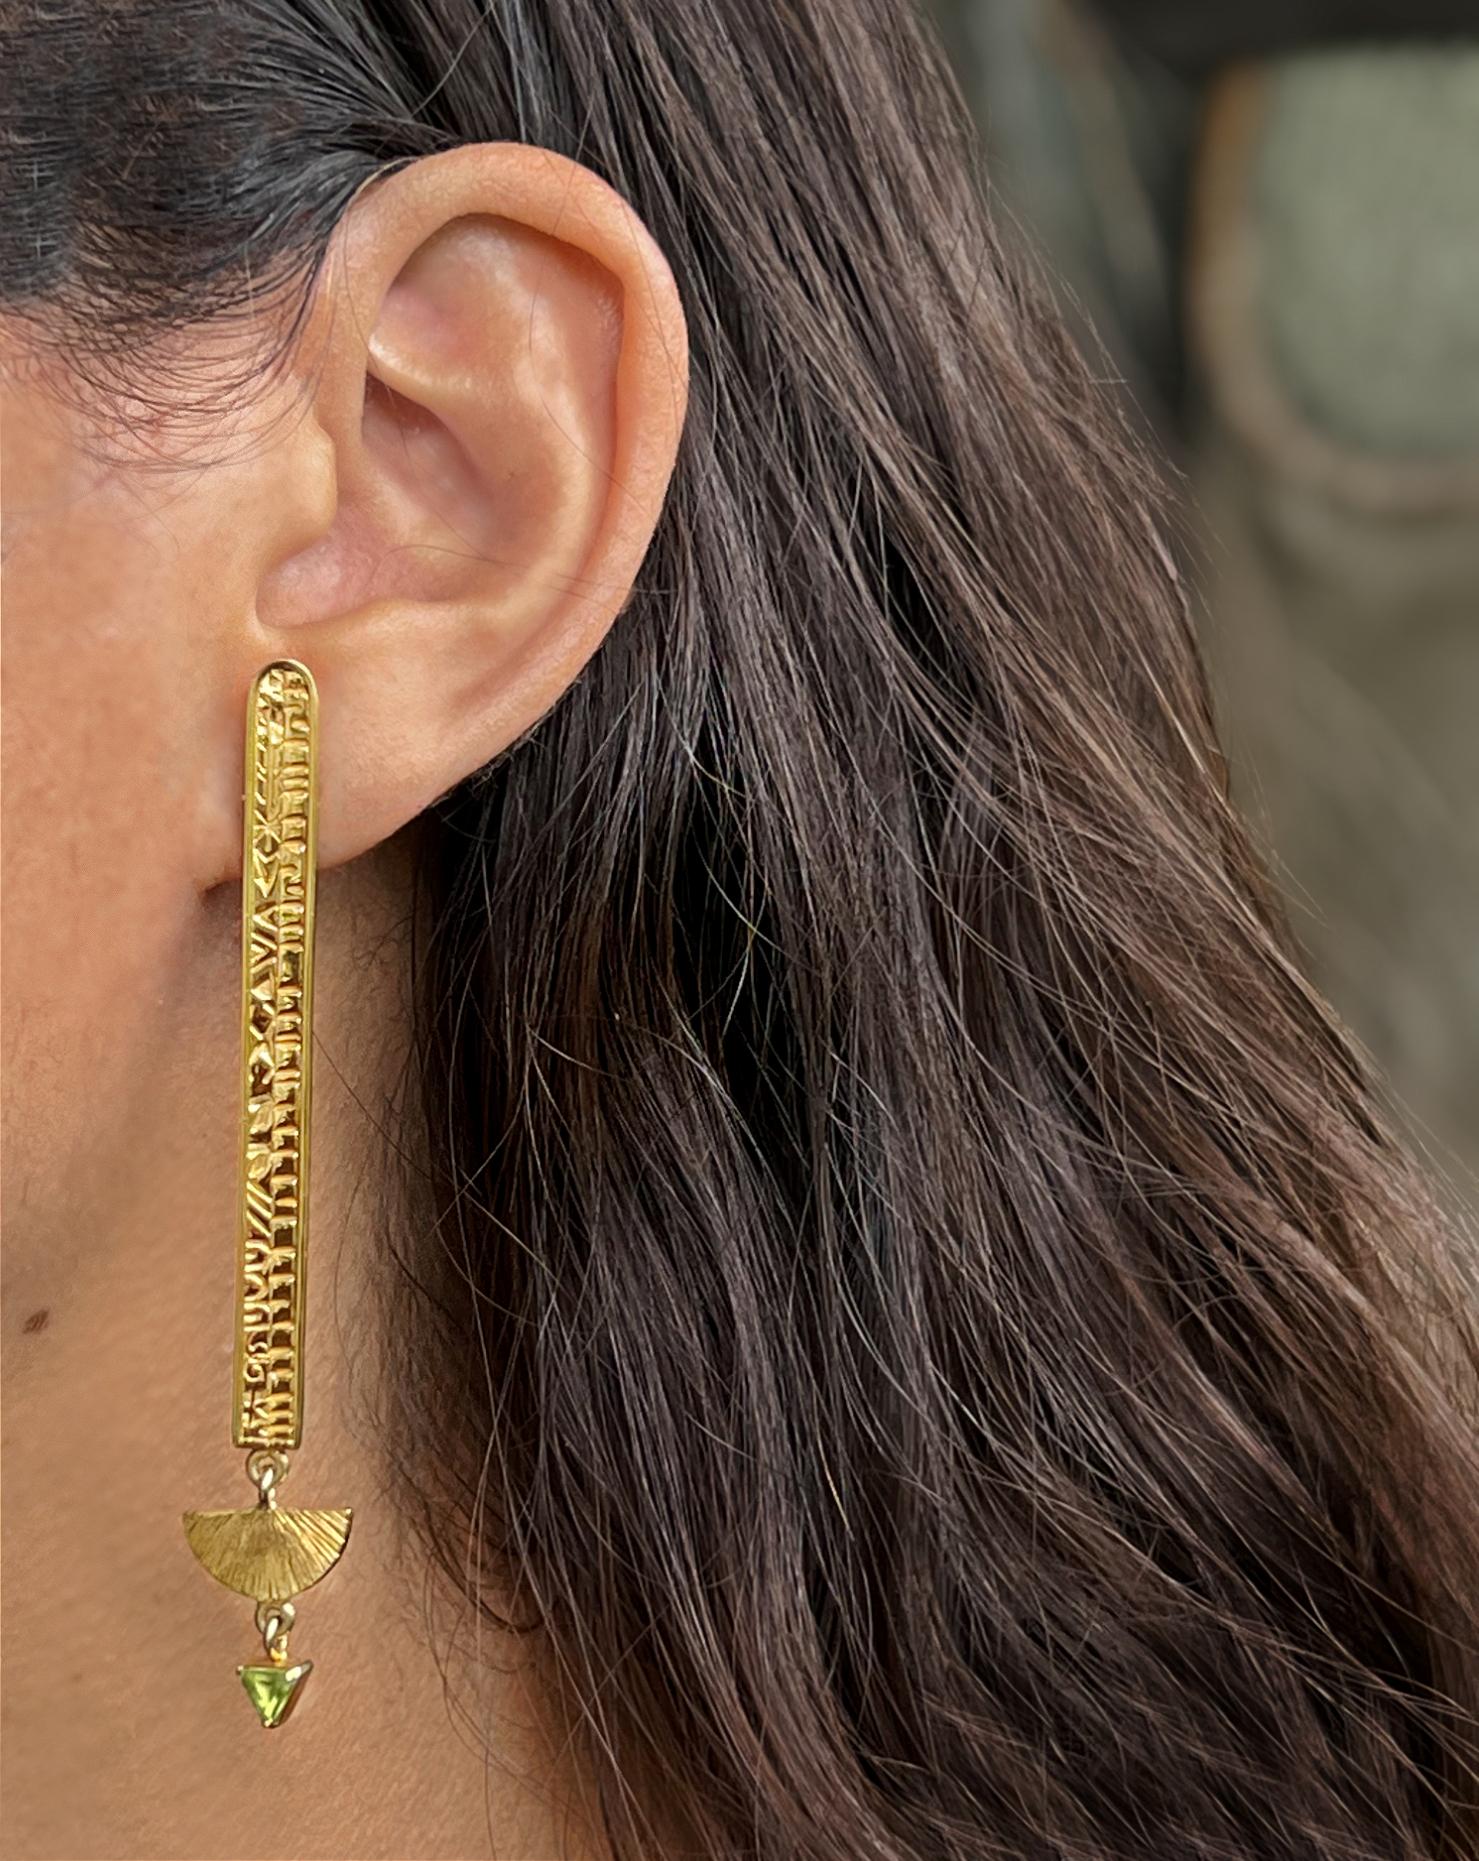 Trillion Cut Cleo Earrings in 14k Yellow Gold: an Ode to Ancient Egypt For Sale